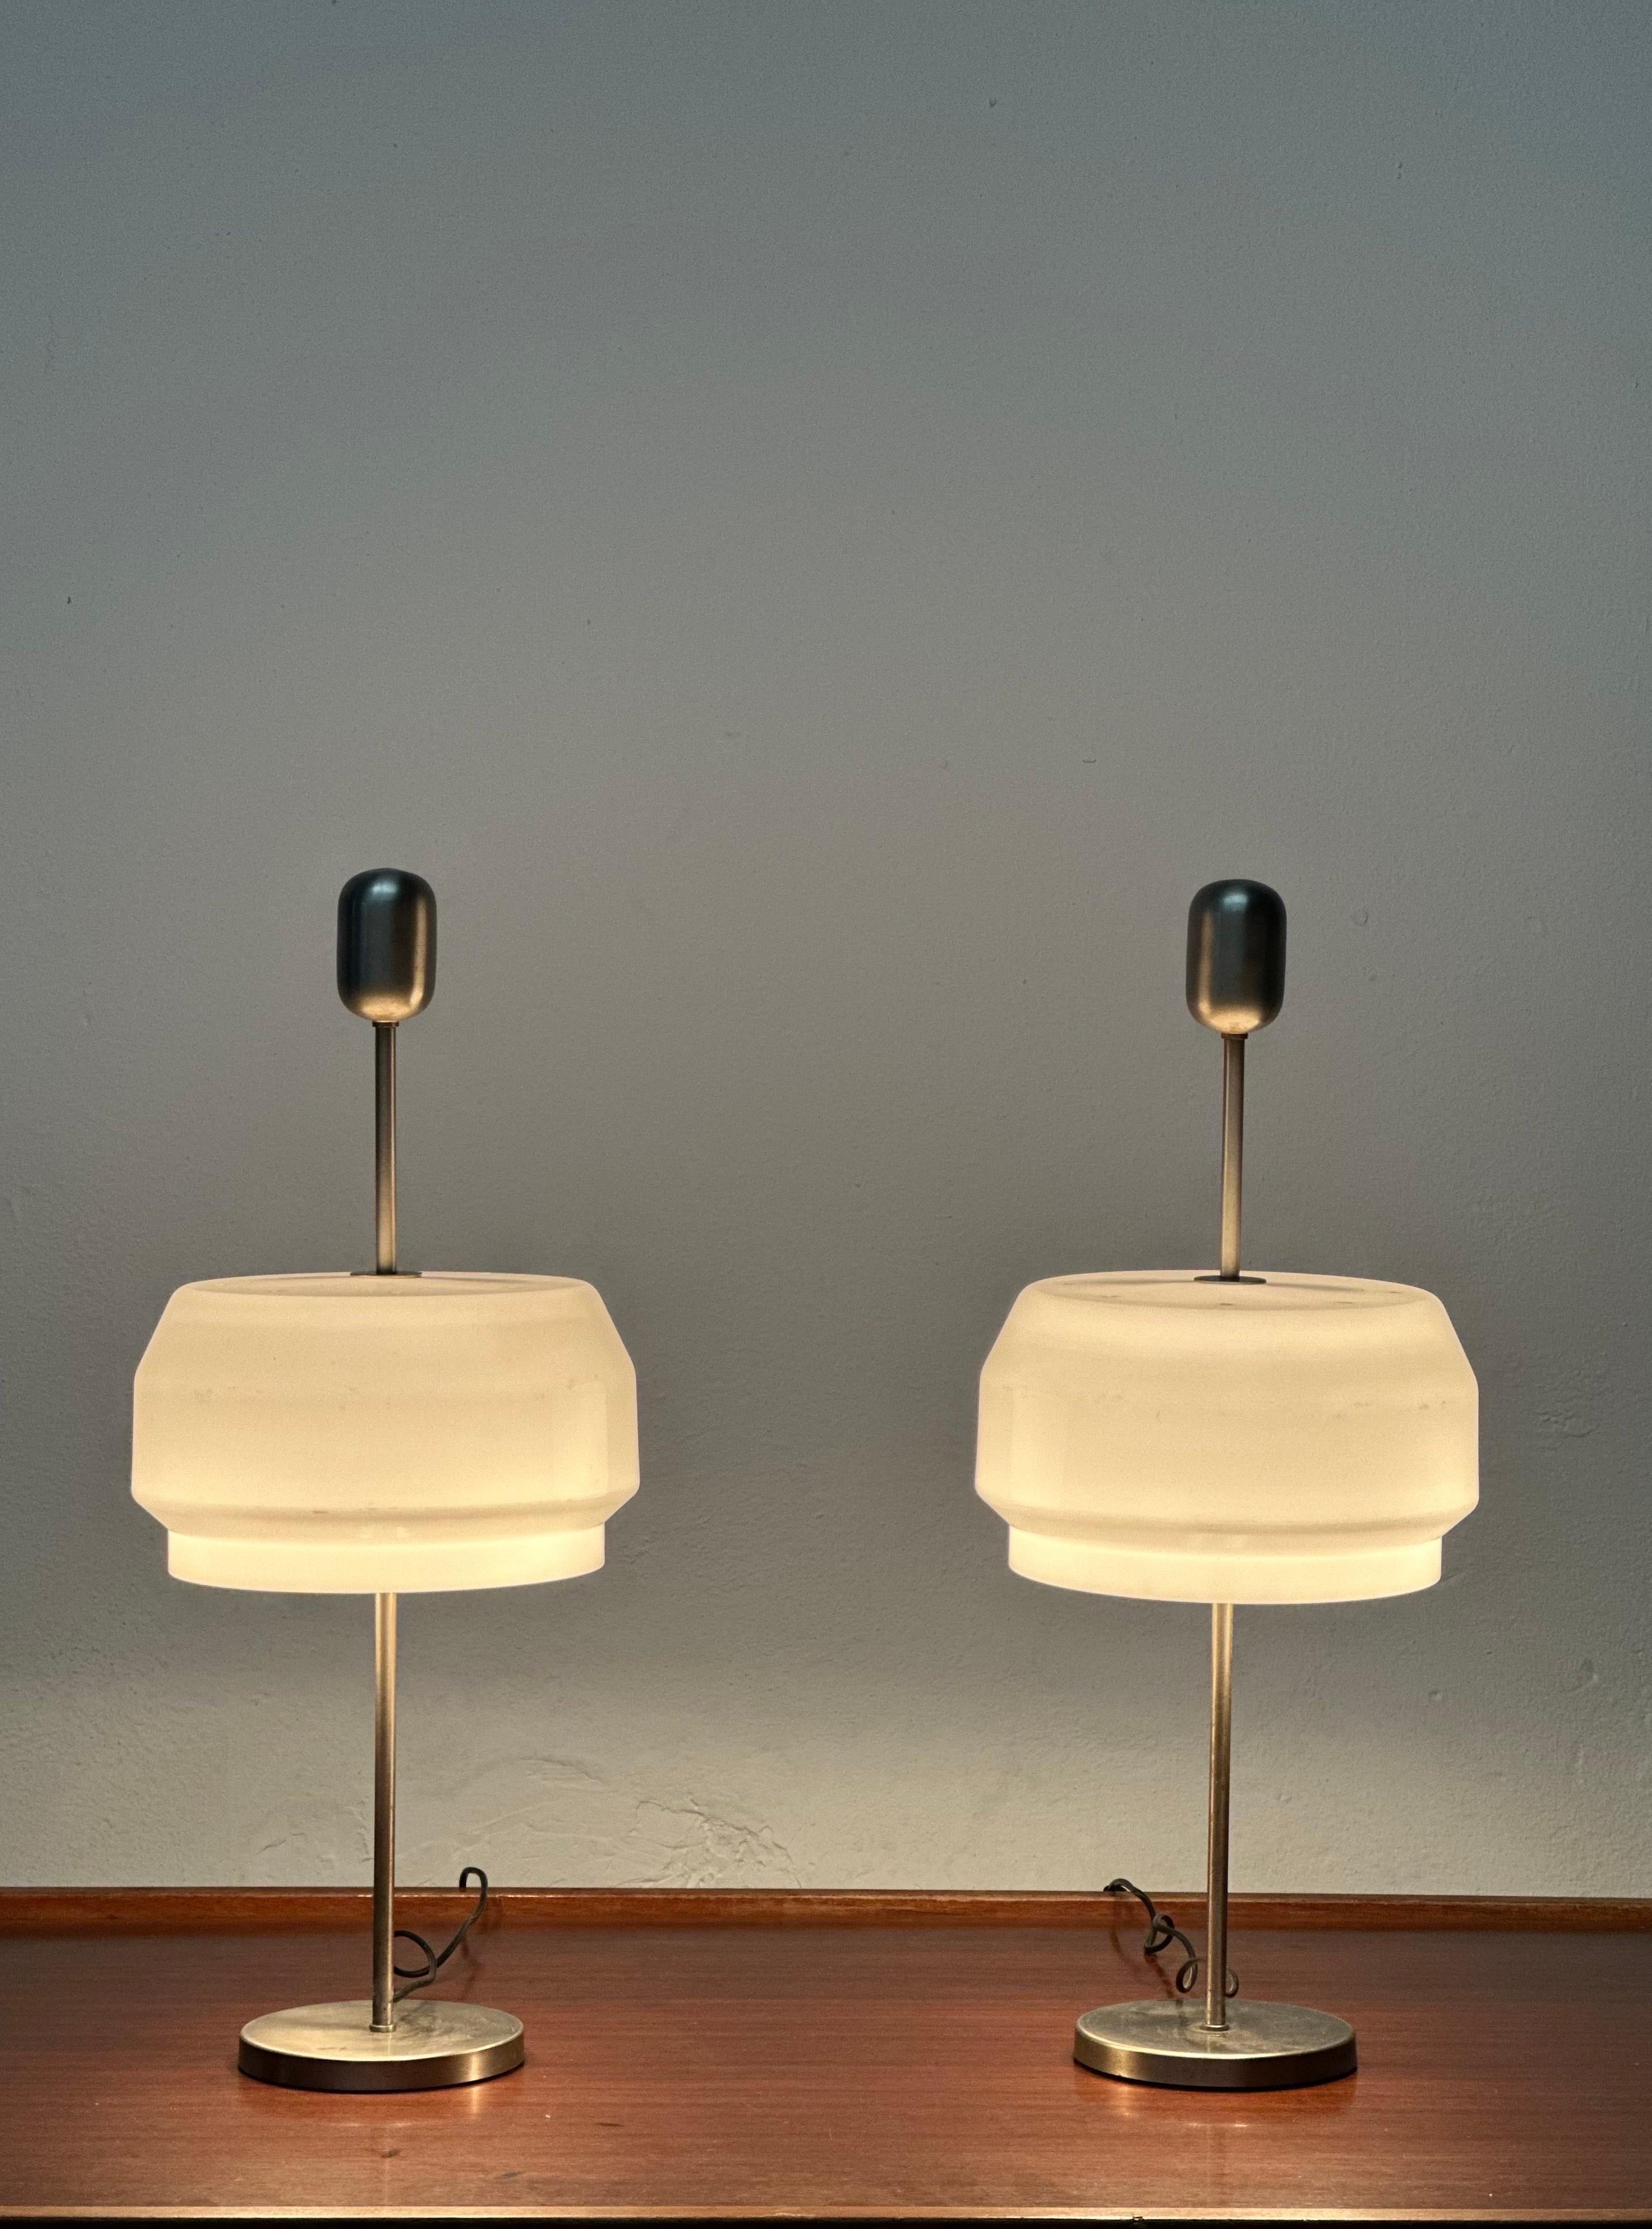 Rare Vintage 'KD9' Table Lamps by Studio GPA Monti for Kartell, 1960s

Presenting a pair of iconic 'KD9' table lamps crafted by Gianemilio Piero e Anna Monti, the creative minds behind Studio GPA Monti, exclusively for Kartell in the 1960s. This is